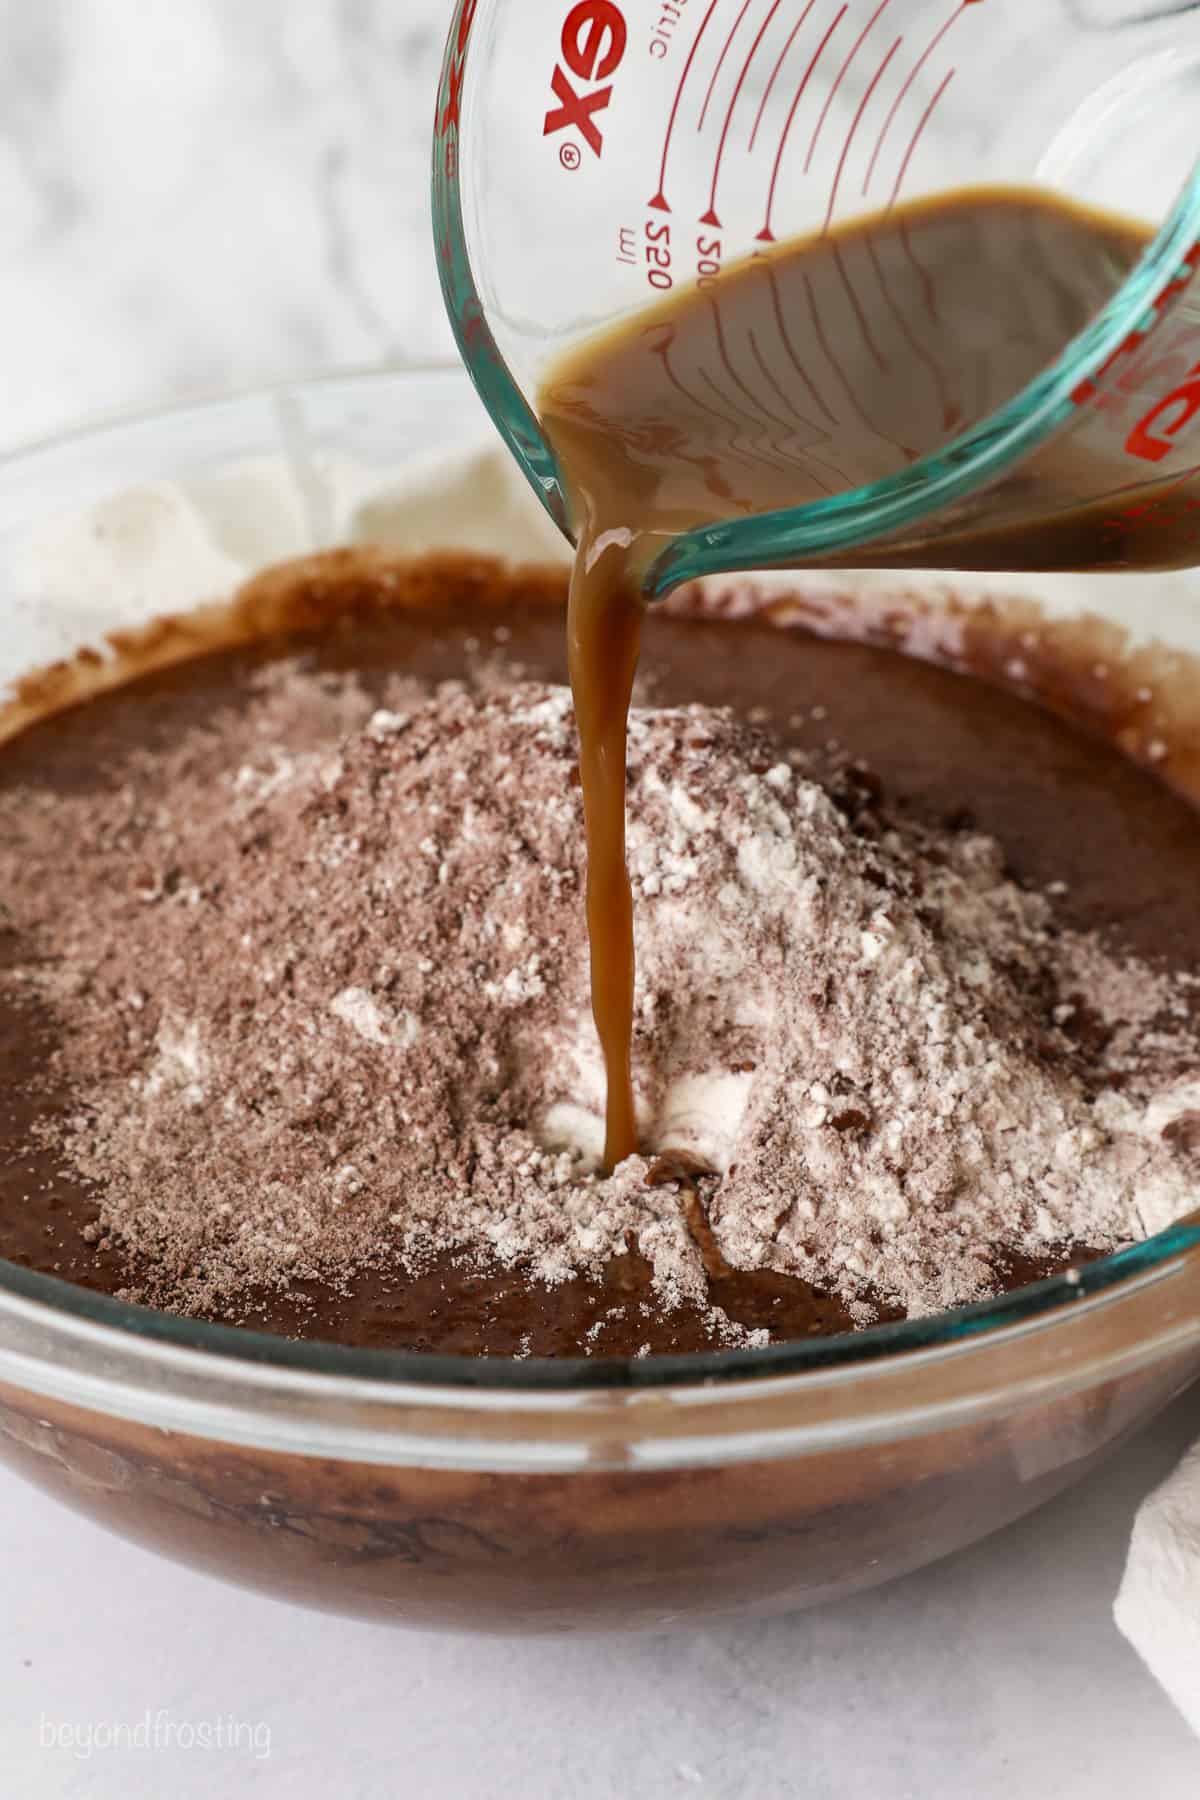 Brewed coffee is poured into the combined cake batter ingredients in a glass bowl.